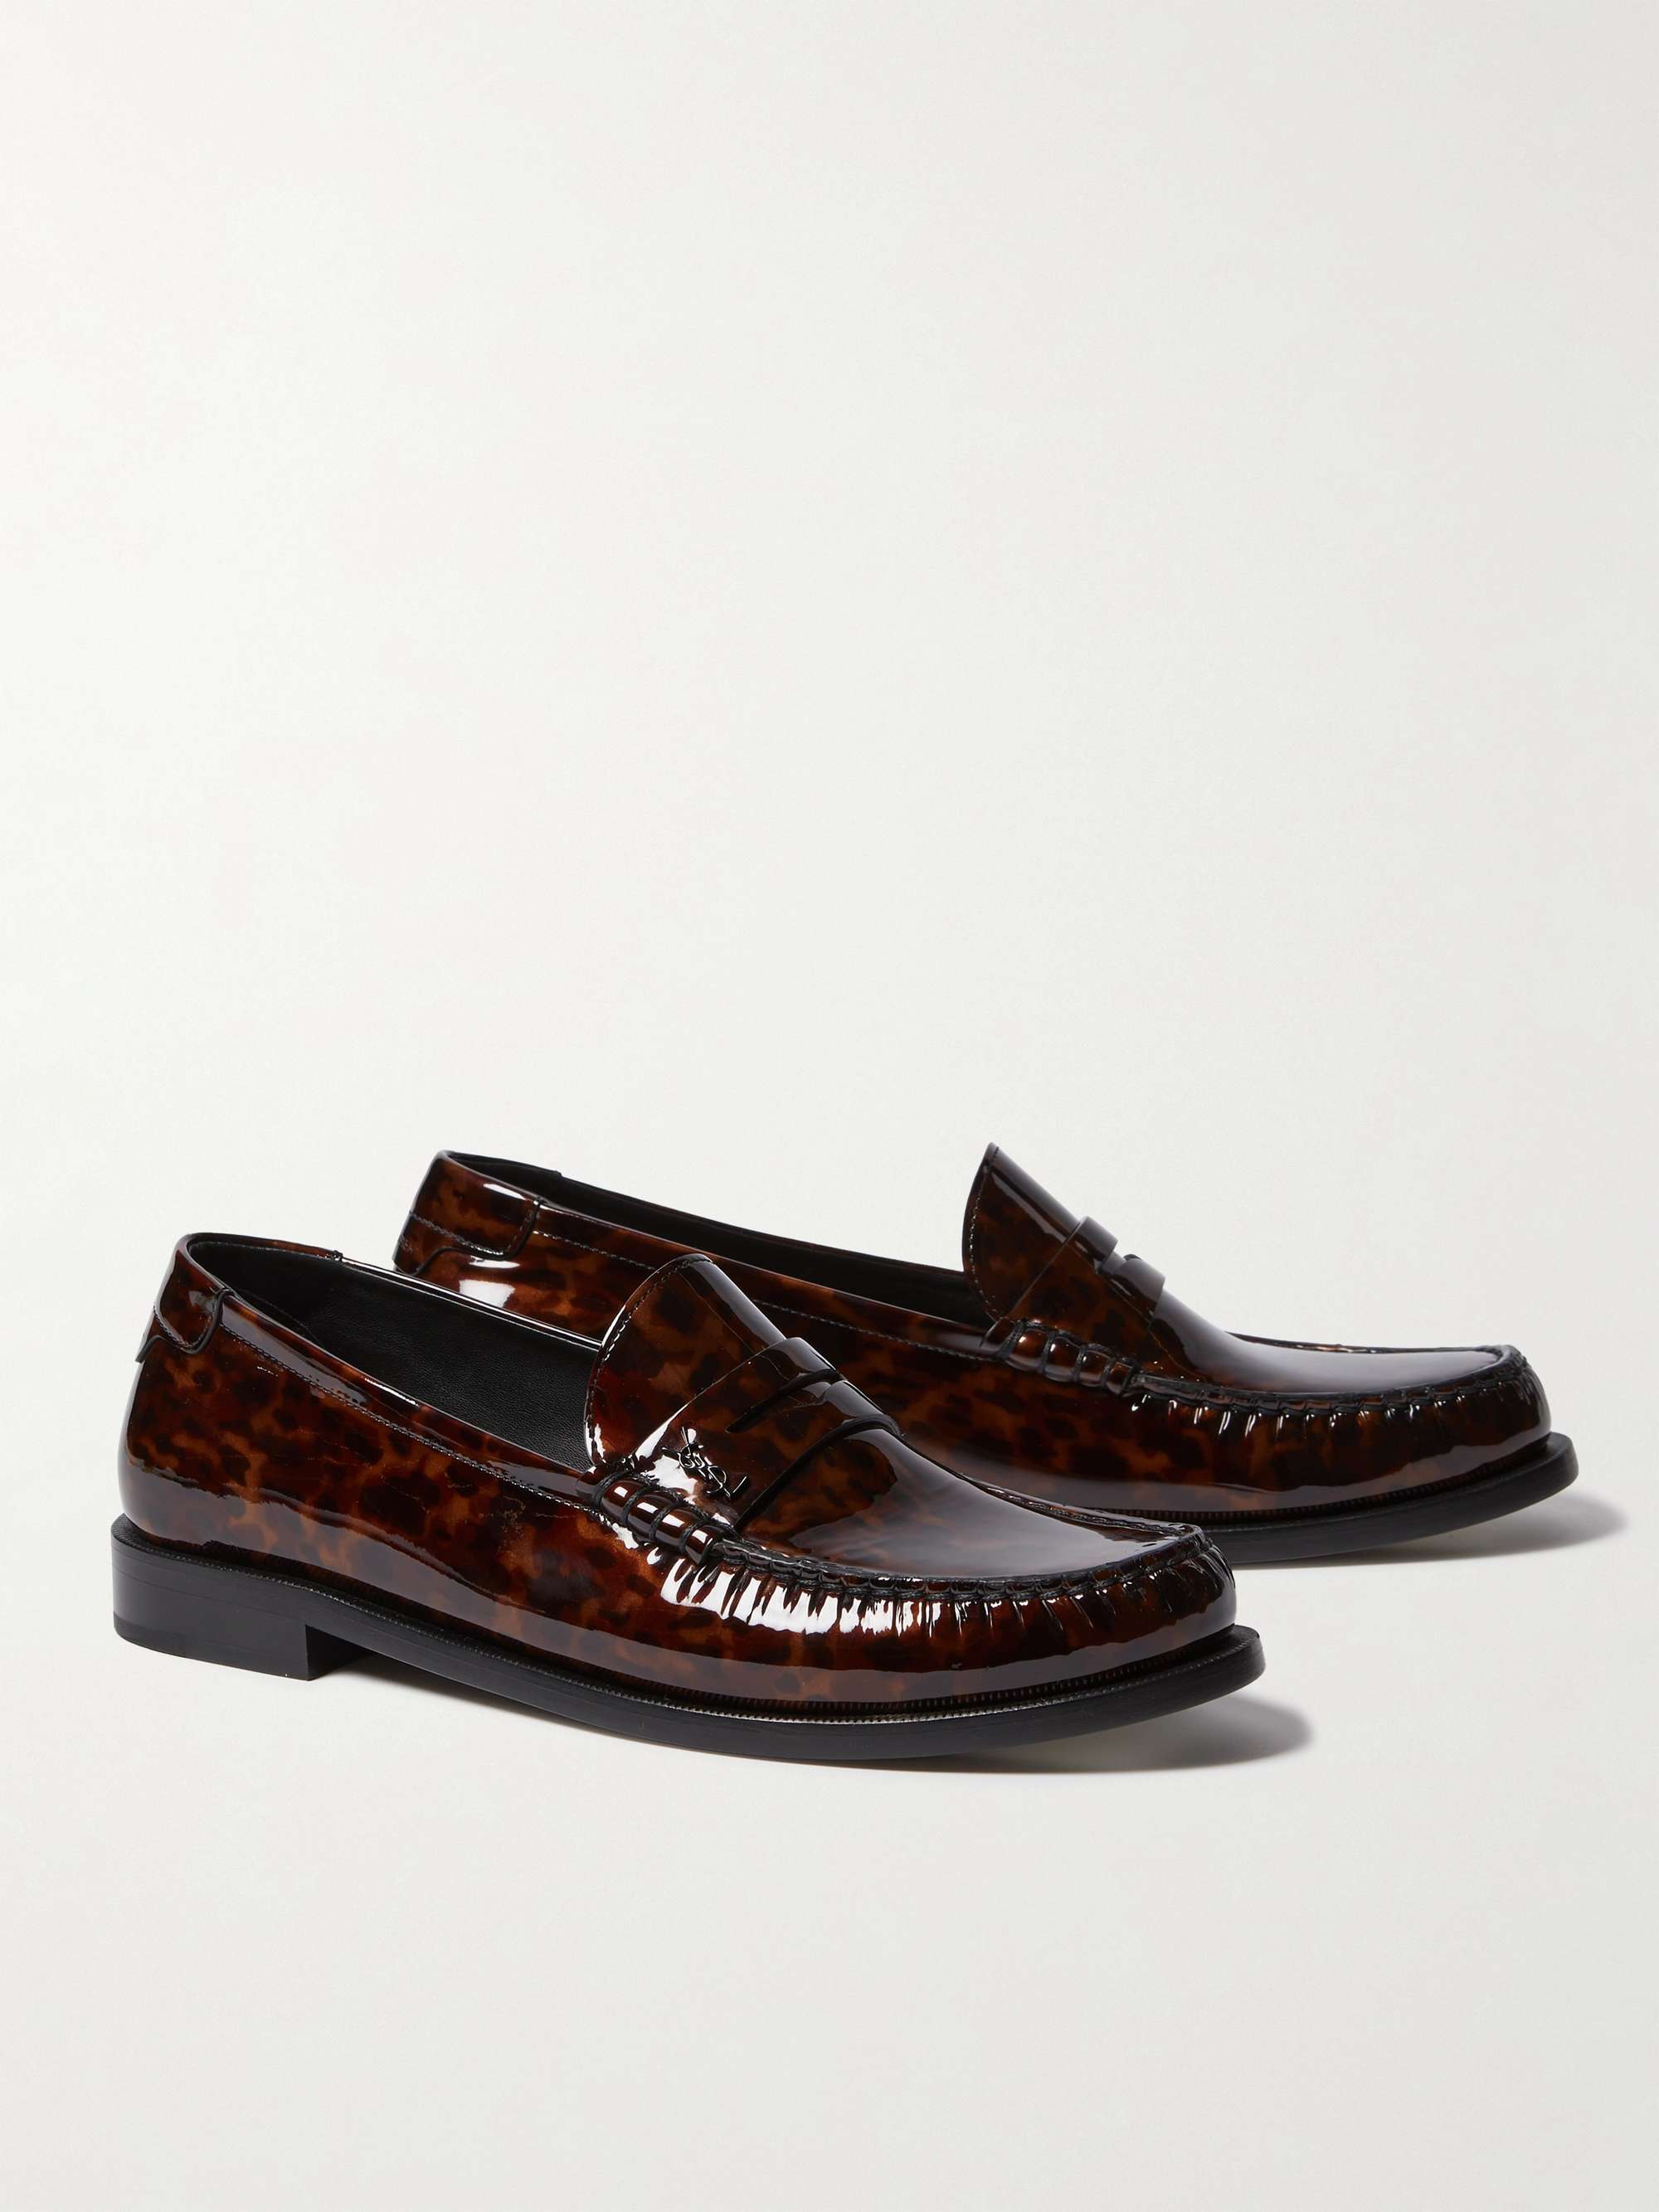 Brown Le Loafer Leopard-Print Leather Penny Loafers | SAINT LAURENT